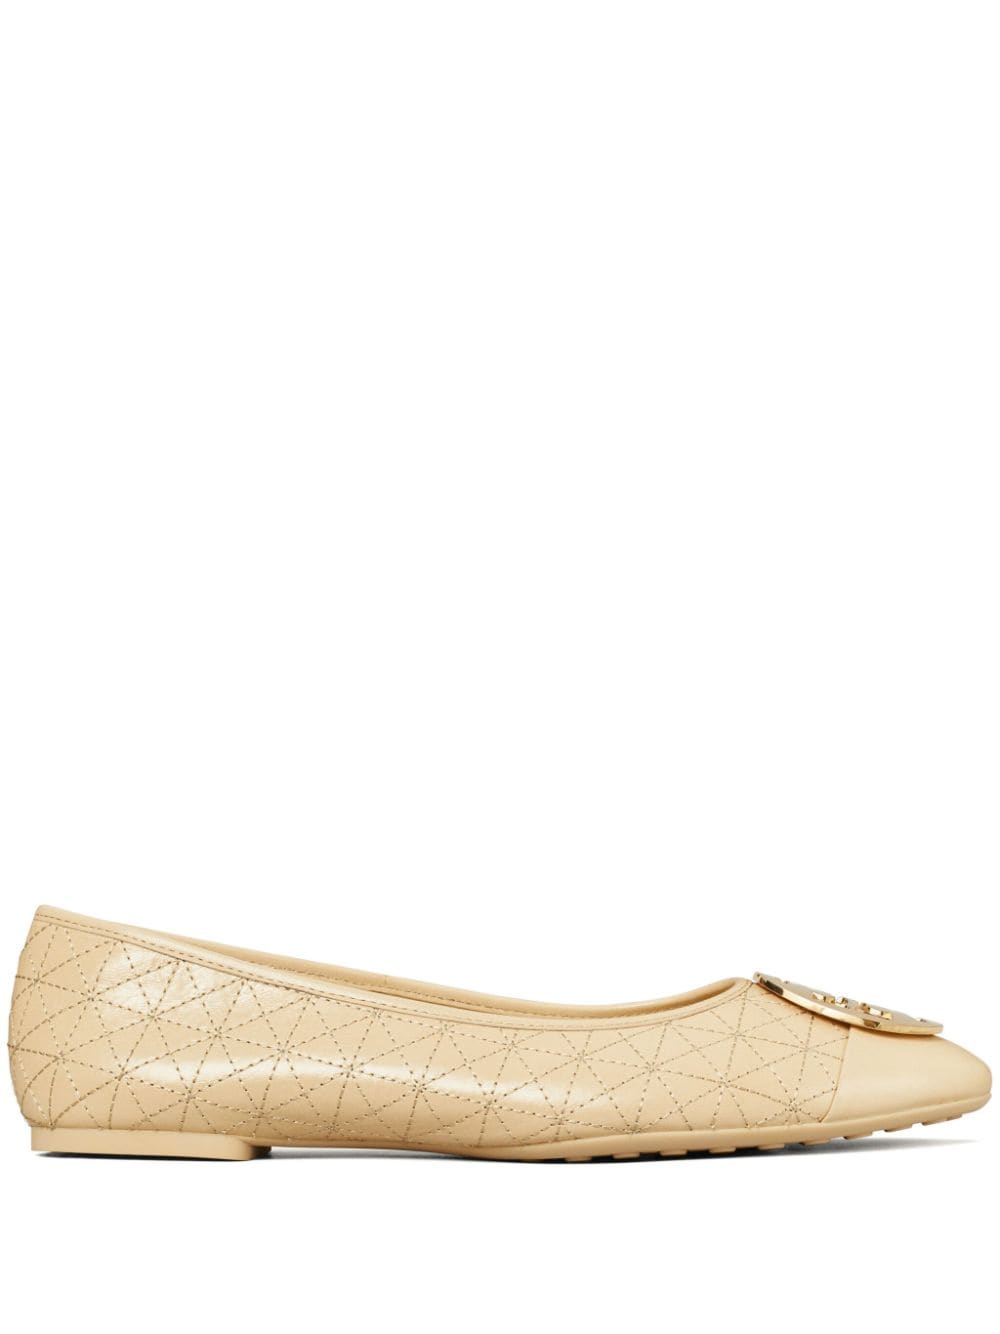 TORY BURCH CLAIRE QUILTED BALLERINA SHOES